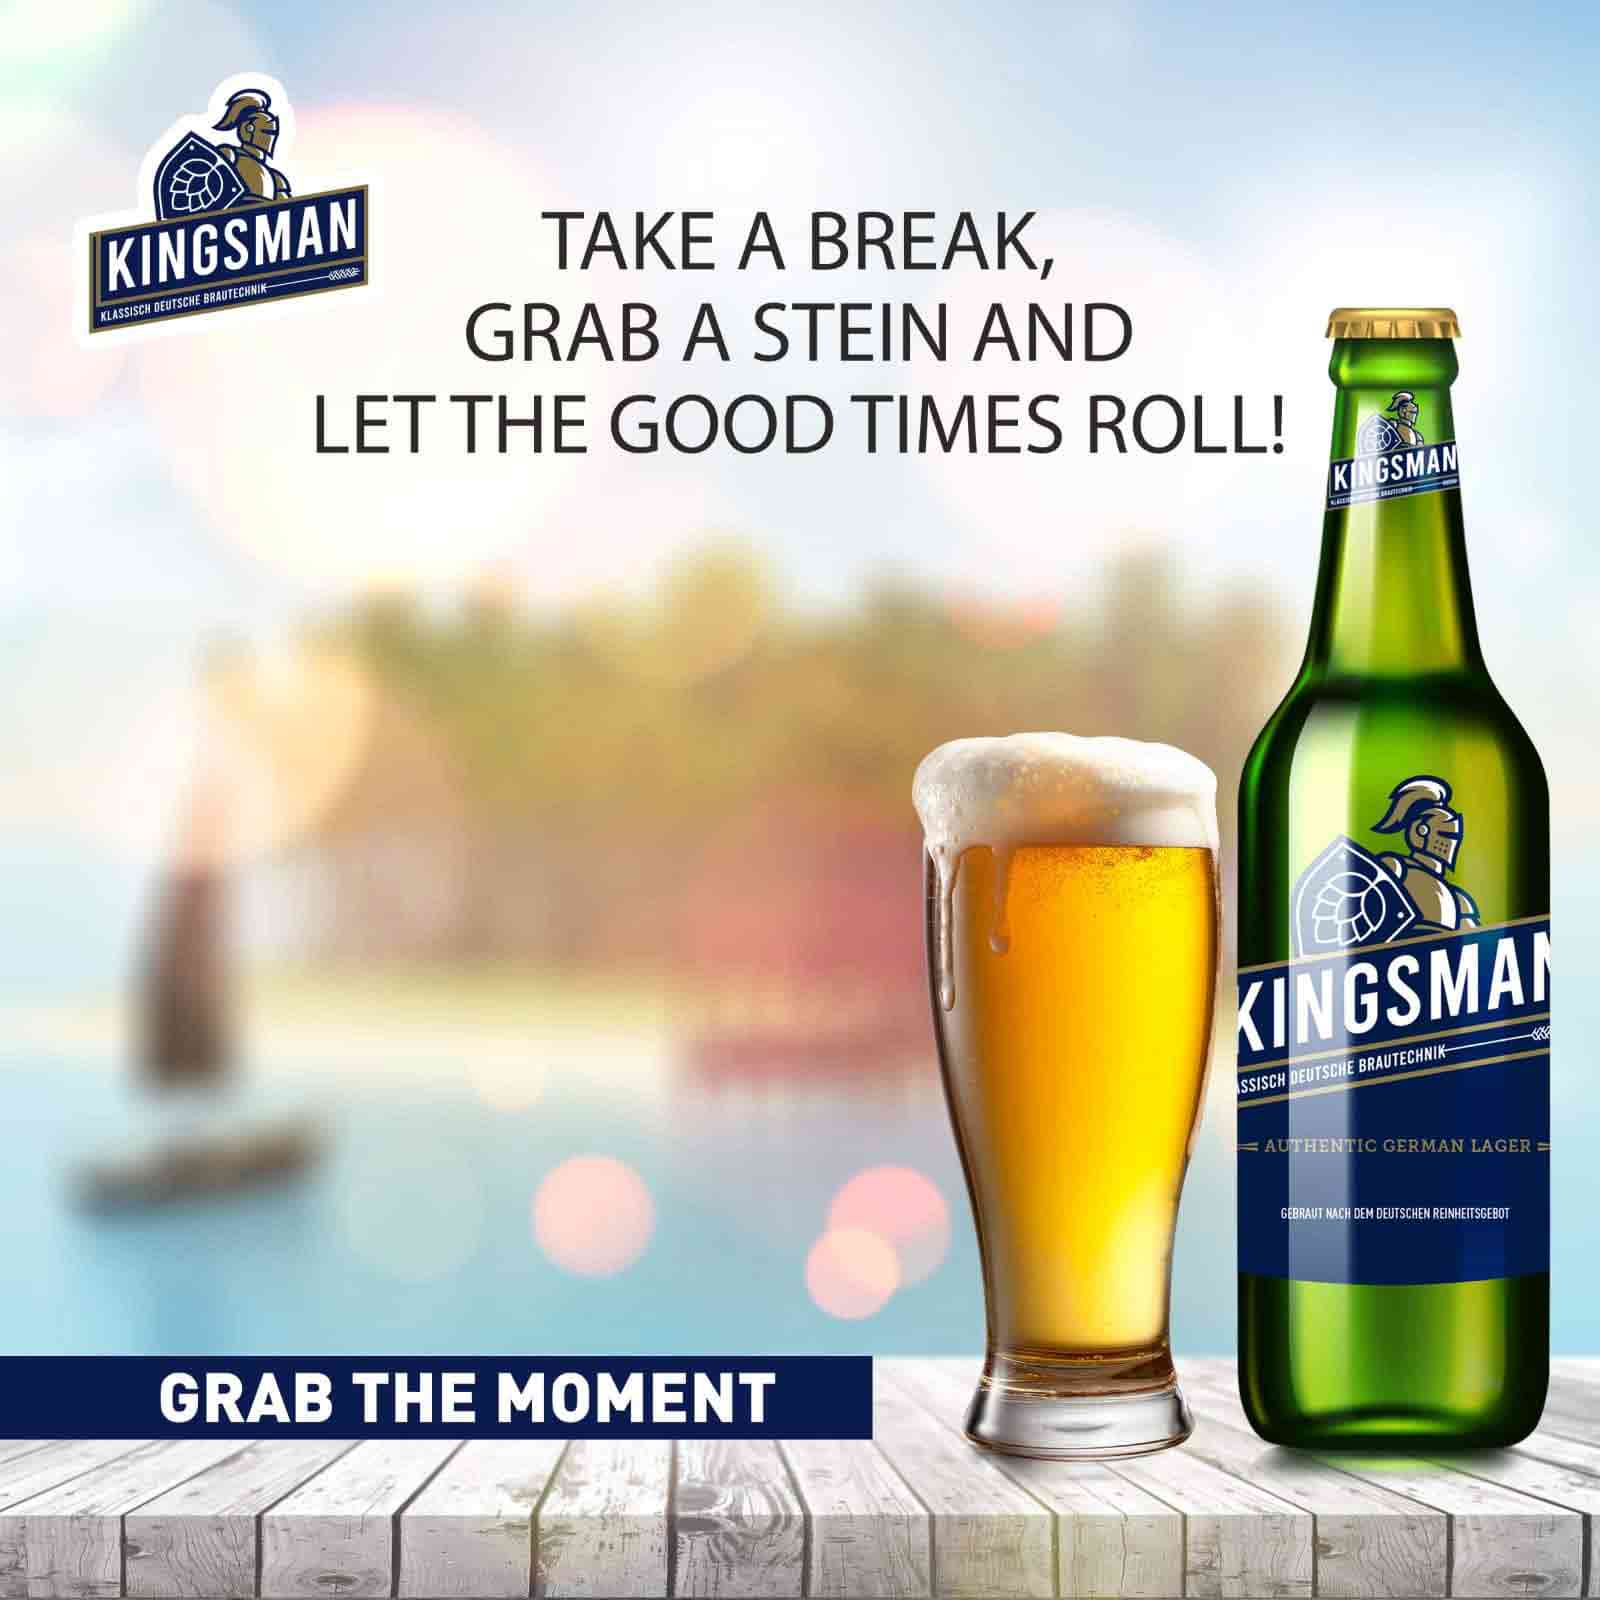 	Take a break and have a good time with our German lager Kingsman Beer